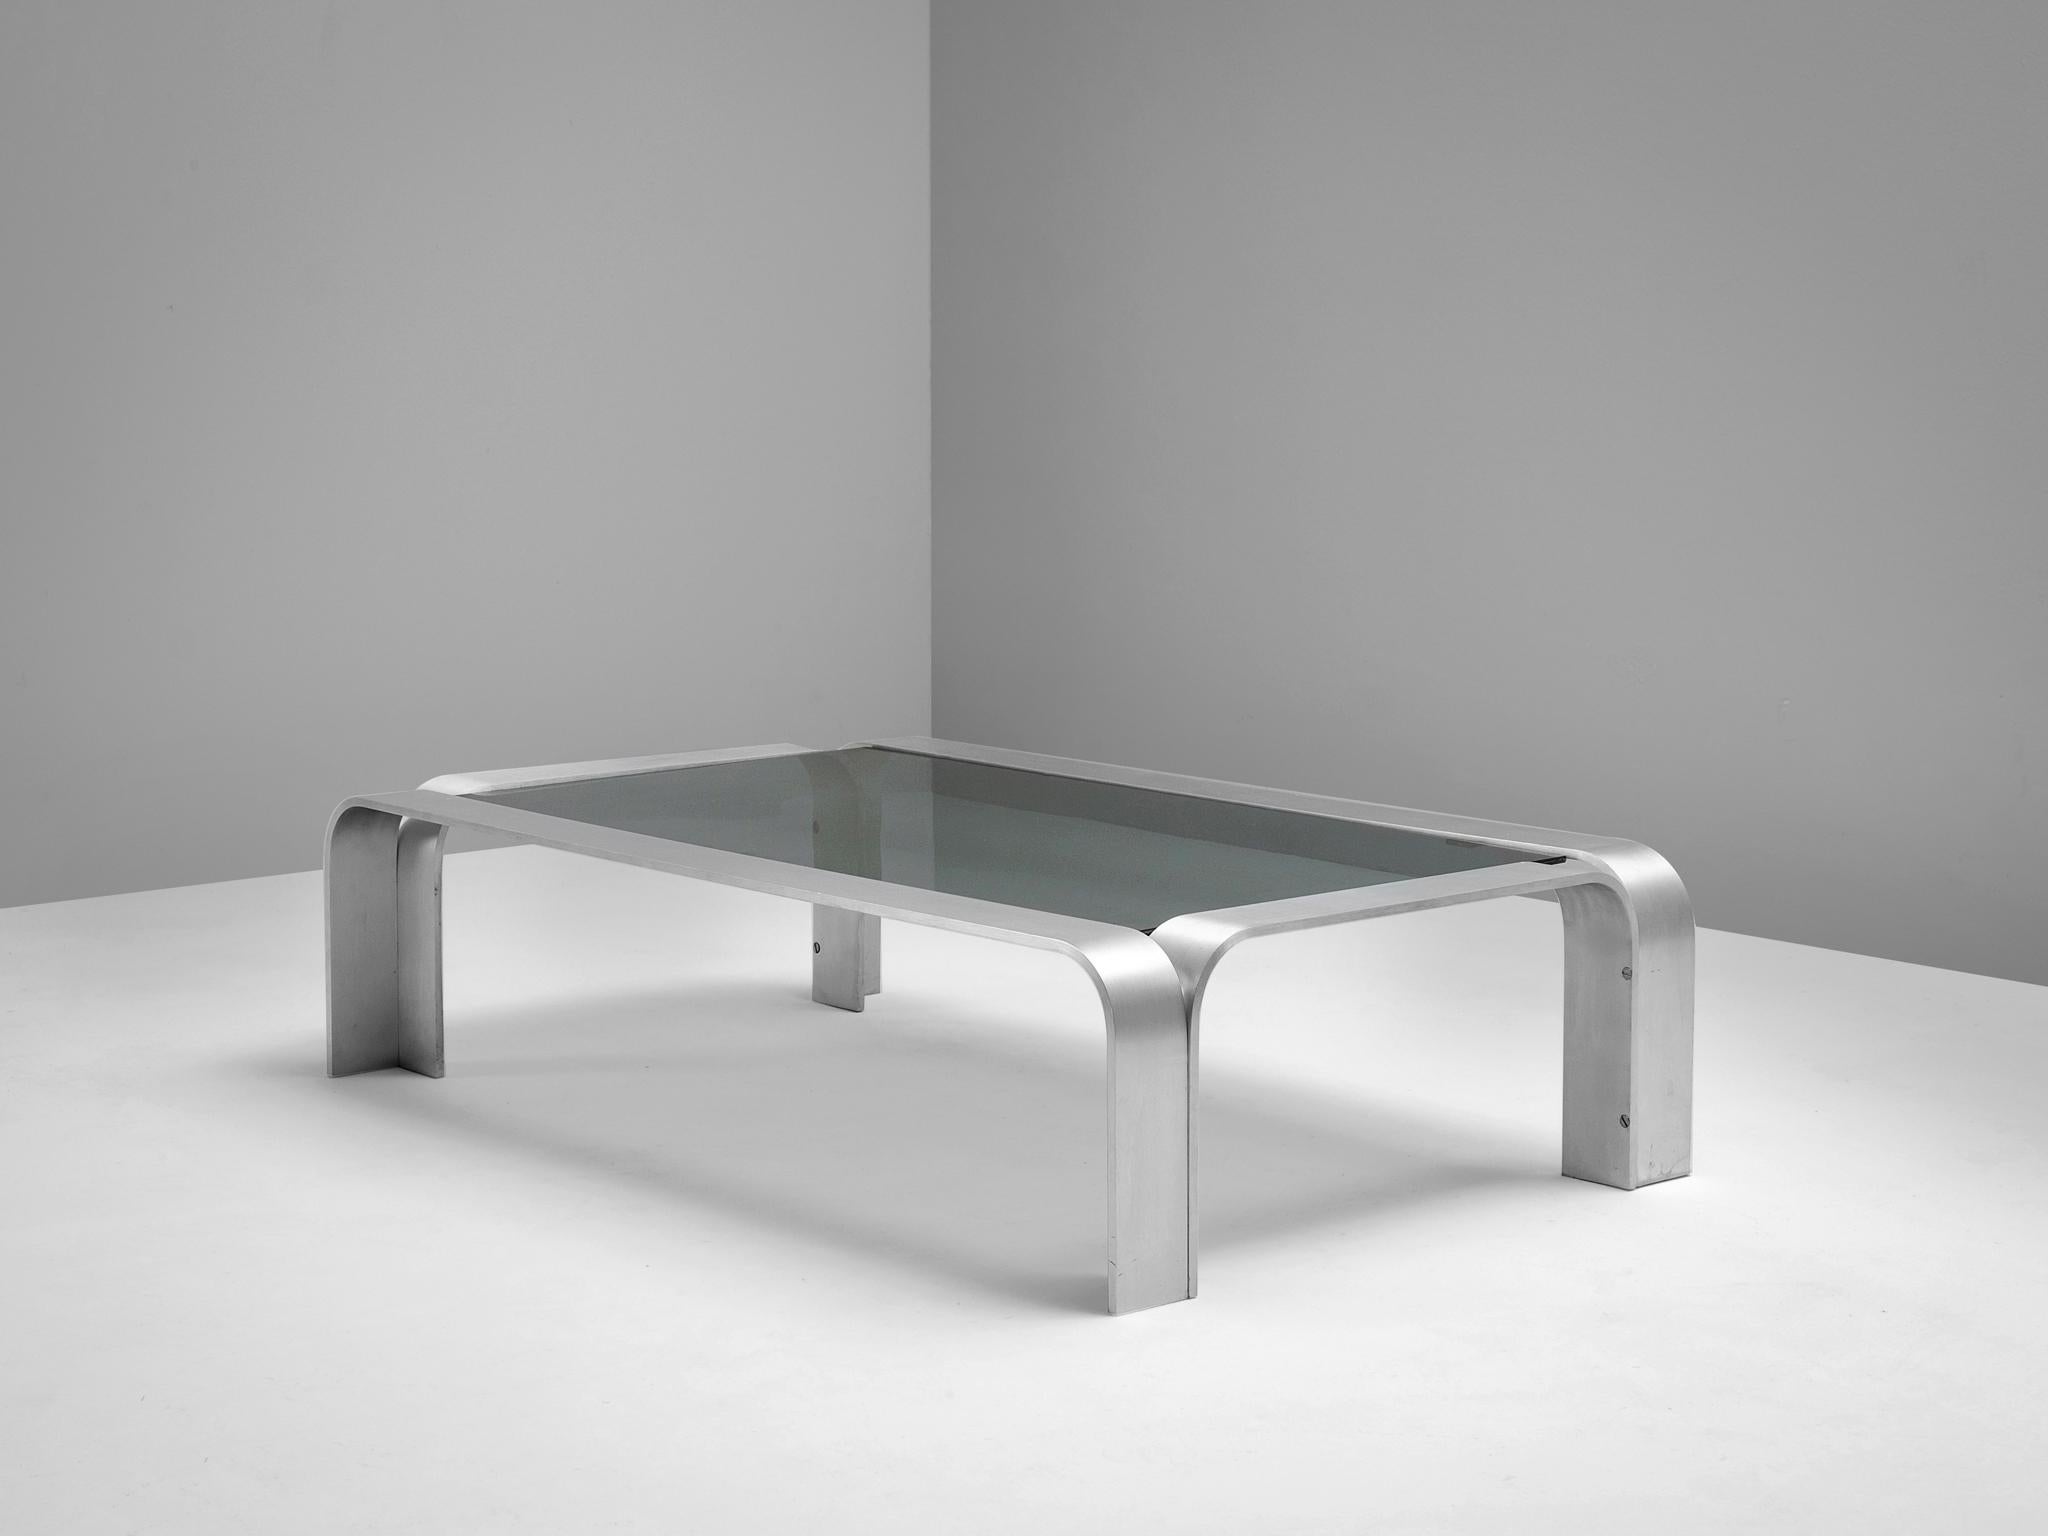 European Modernist Coffee Table in Aluminum and Glass